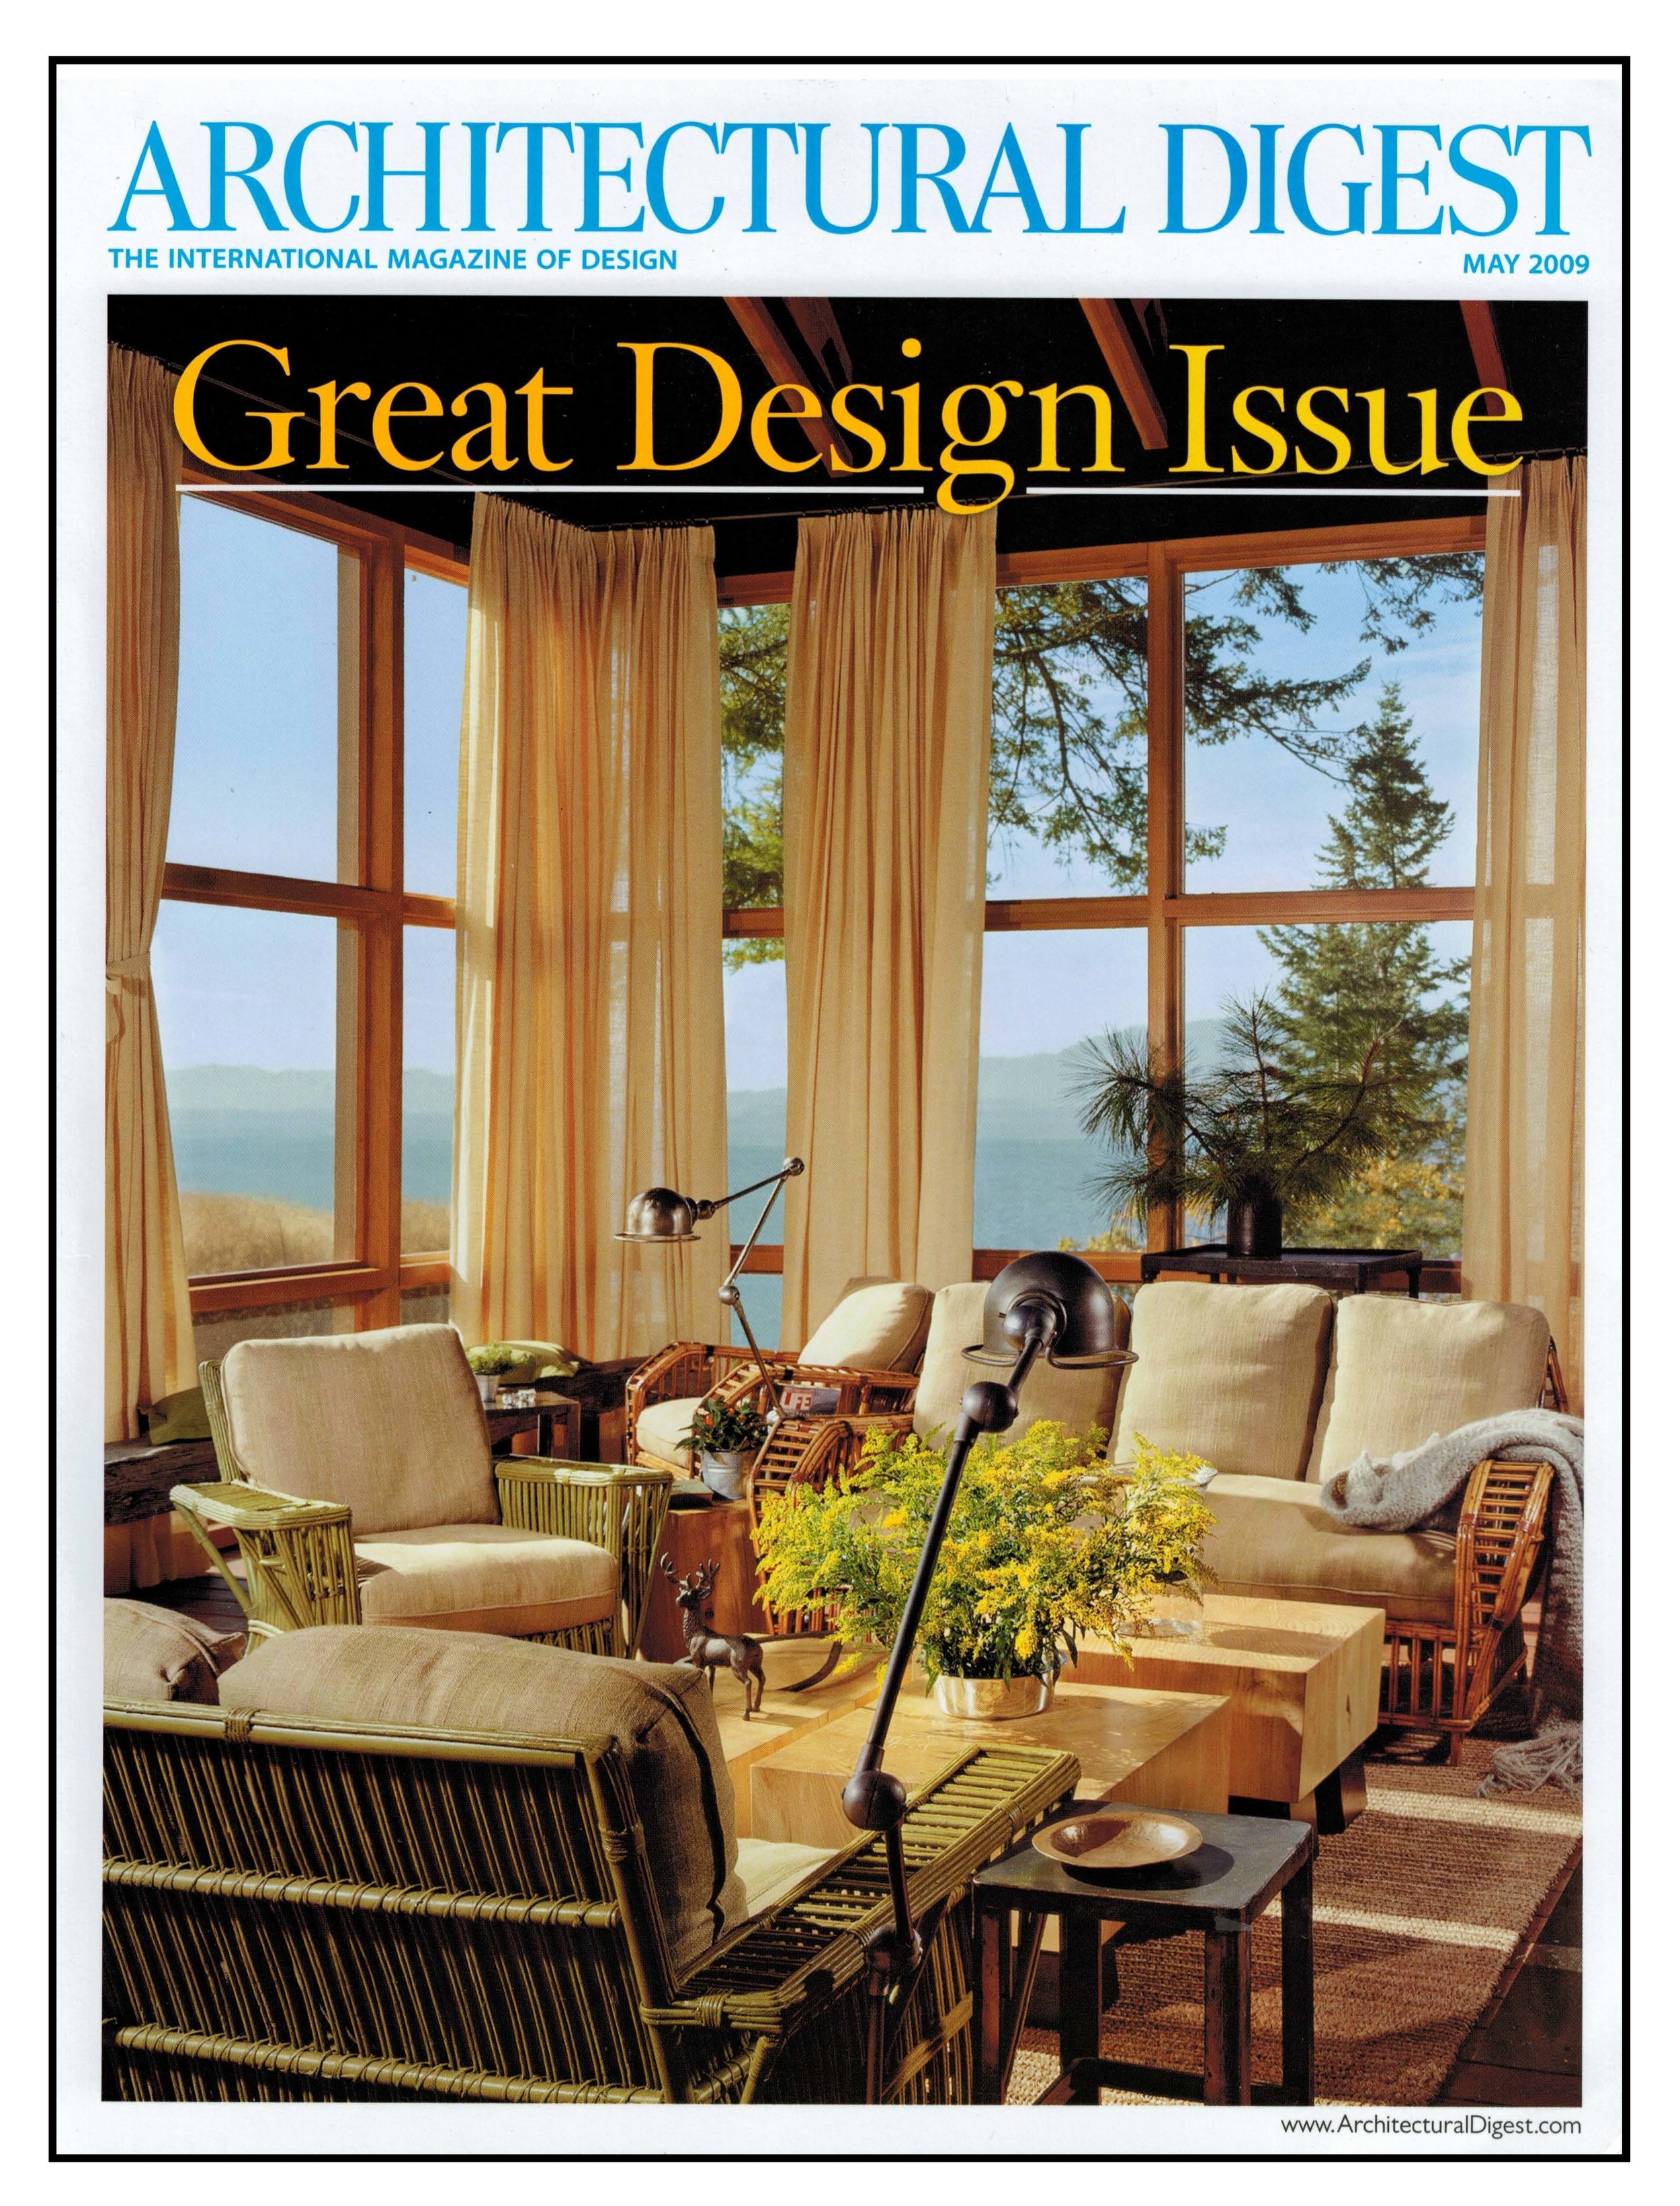 1 Architectural Digest-May 2009.jpg